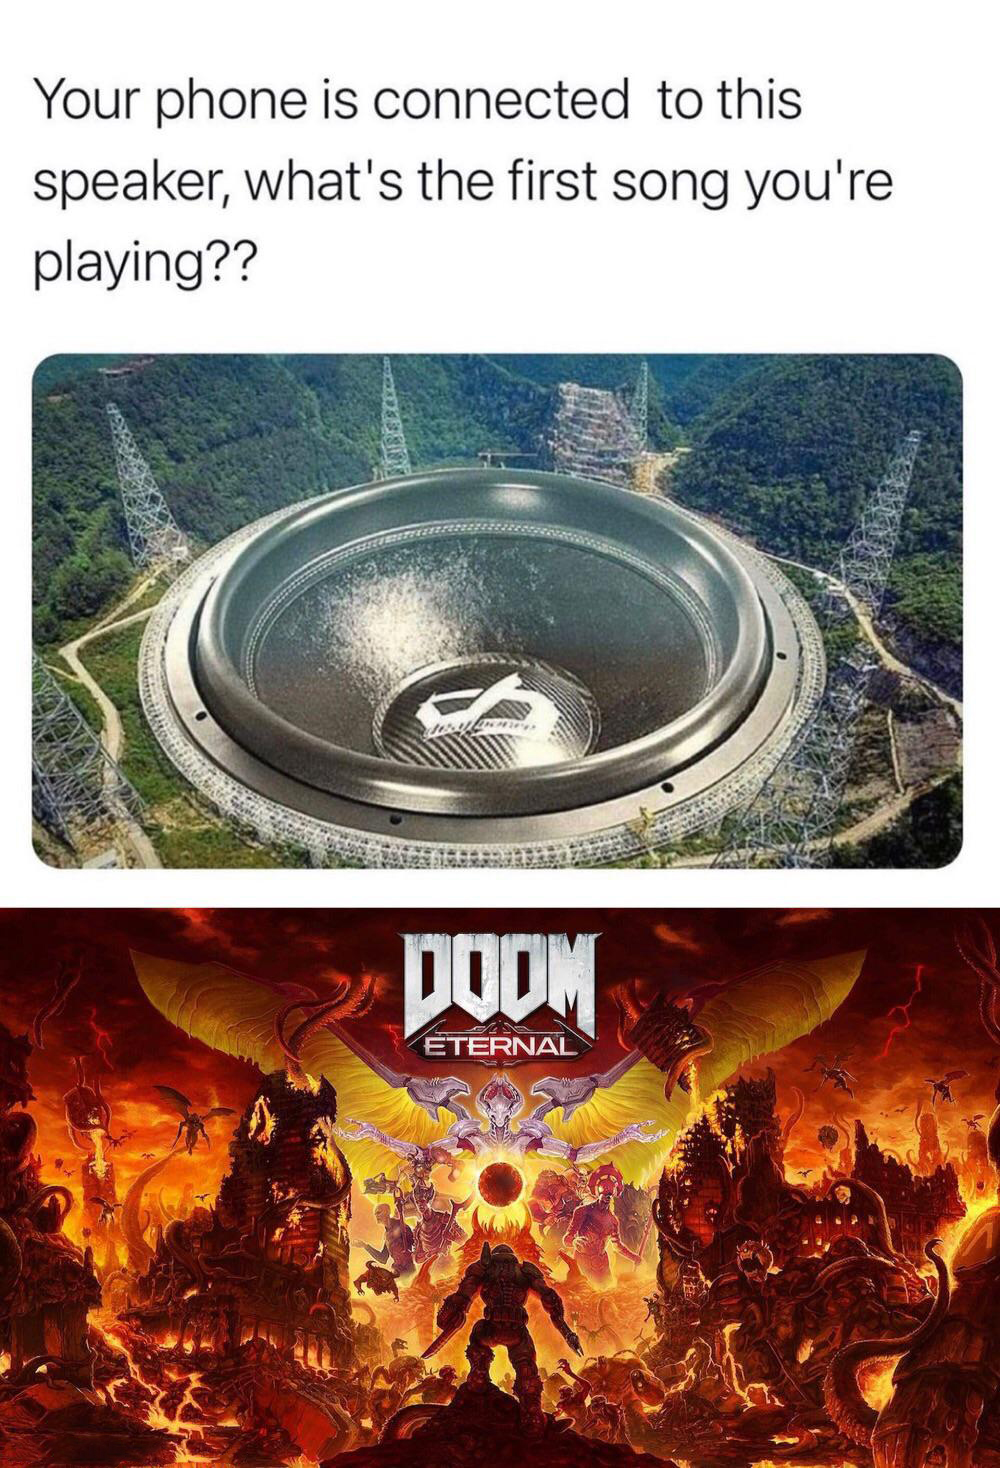 dank memes - doom eternal cover art - Your phone is connected to this speaker, what's the first song you're playing?? Doom Eternal